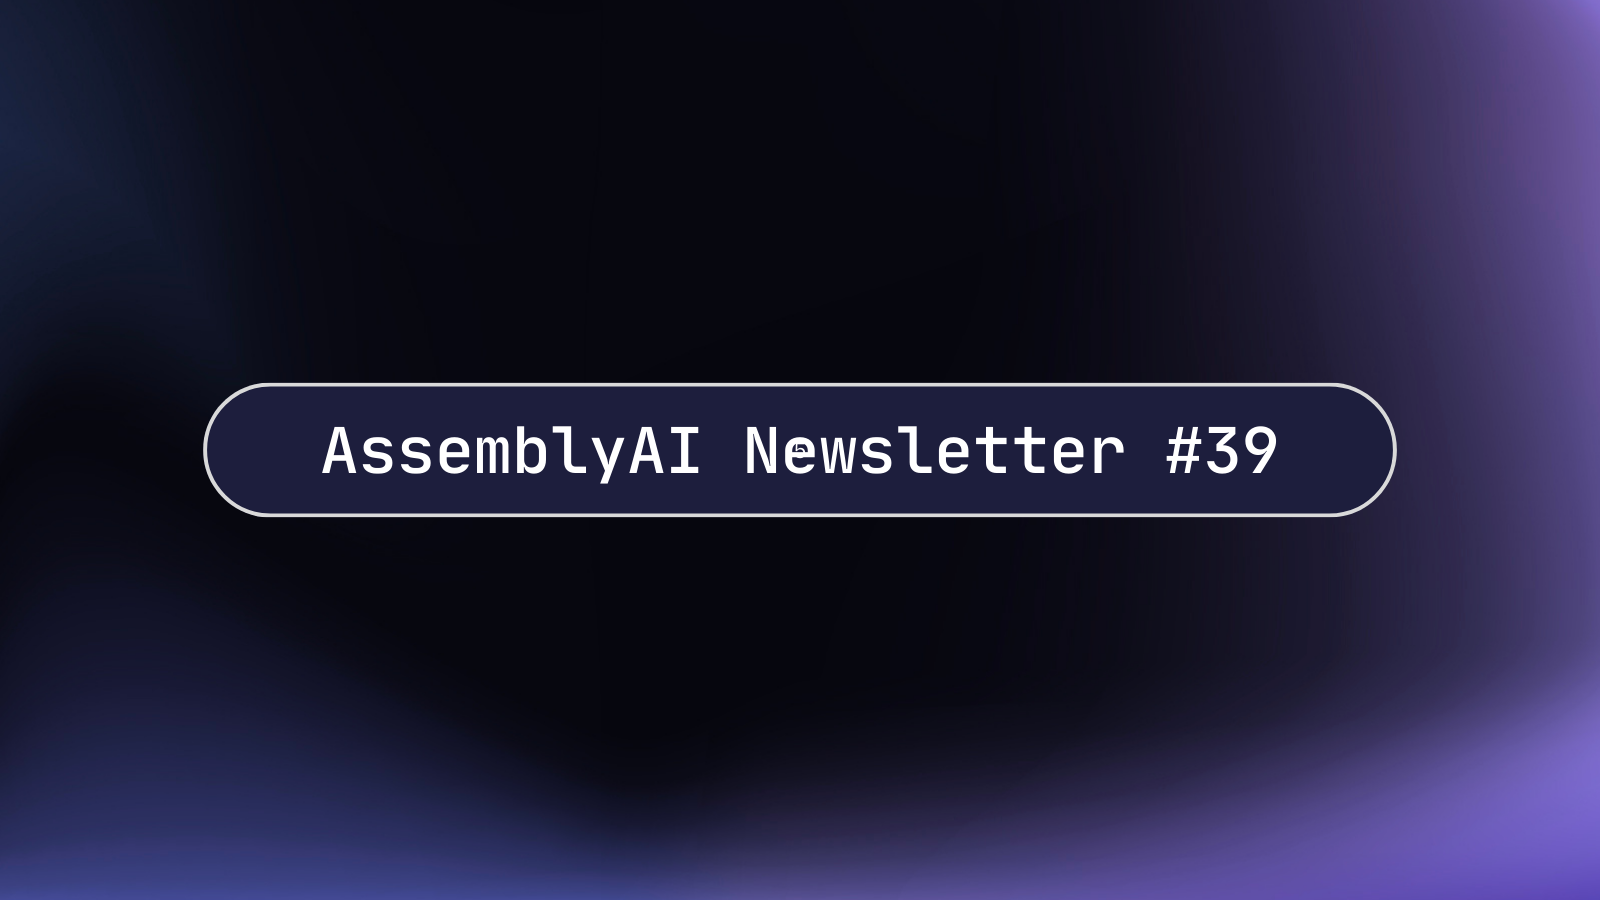 Newsletter #39: Build With AssemblyAI's Integrations